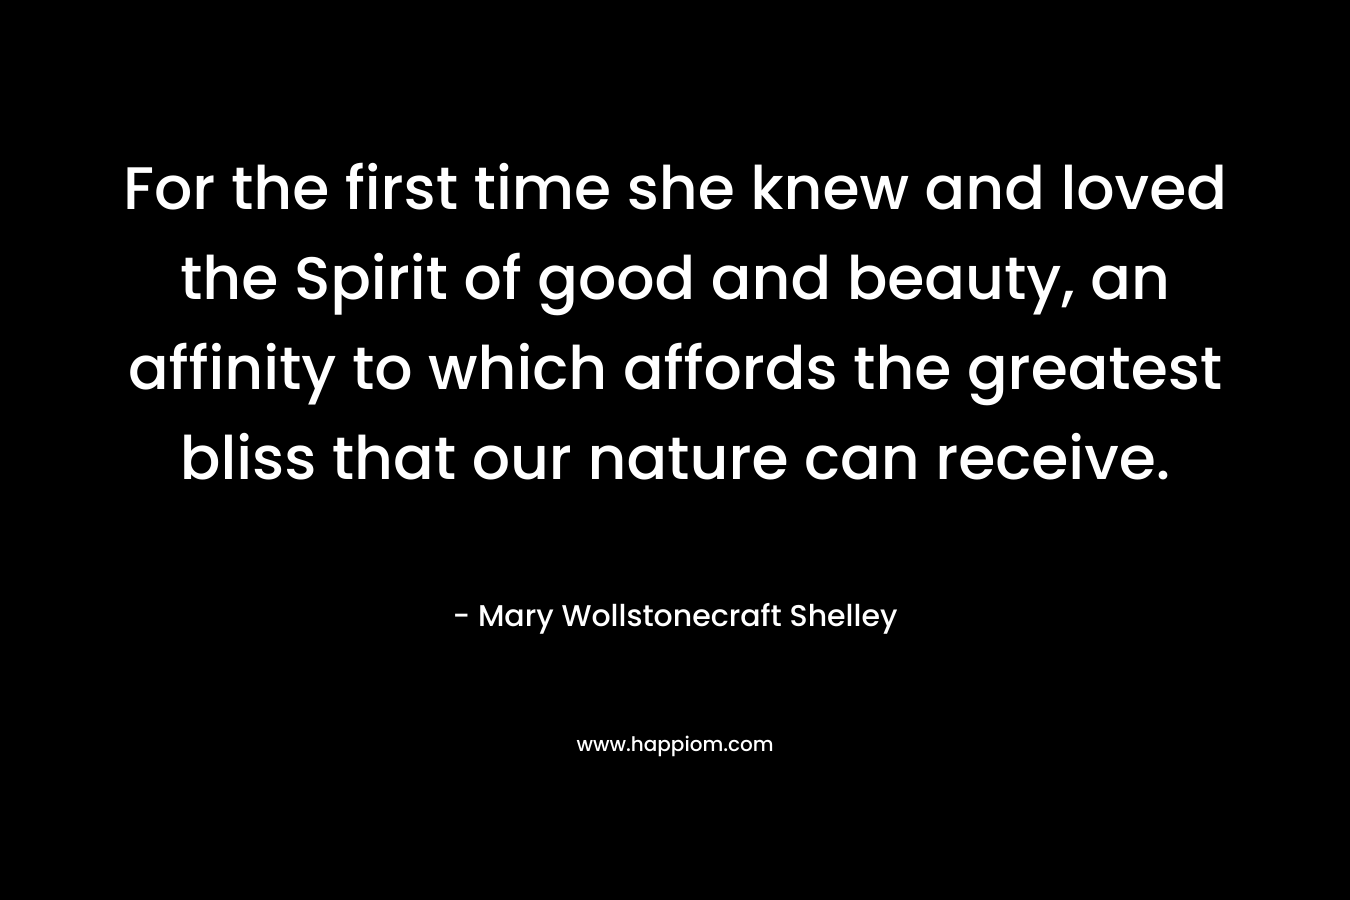 For the first time she knew and loved the Spirit of good and beauty, an affinity to which affords the greatest bliss that our nature can receive. – Mary Wollstonecraft Shelley